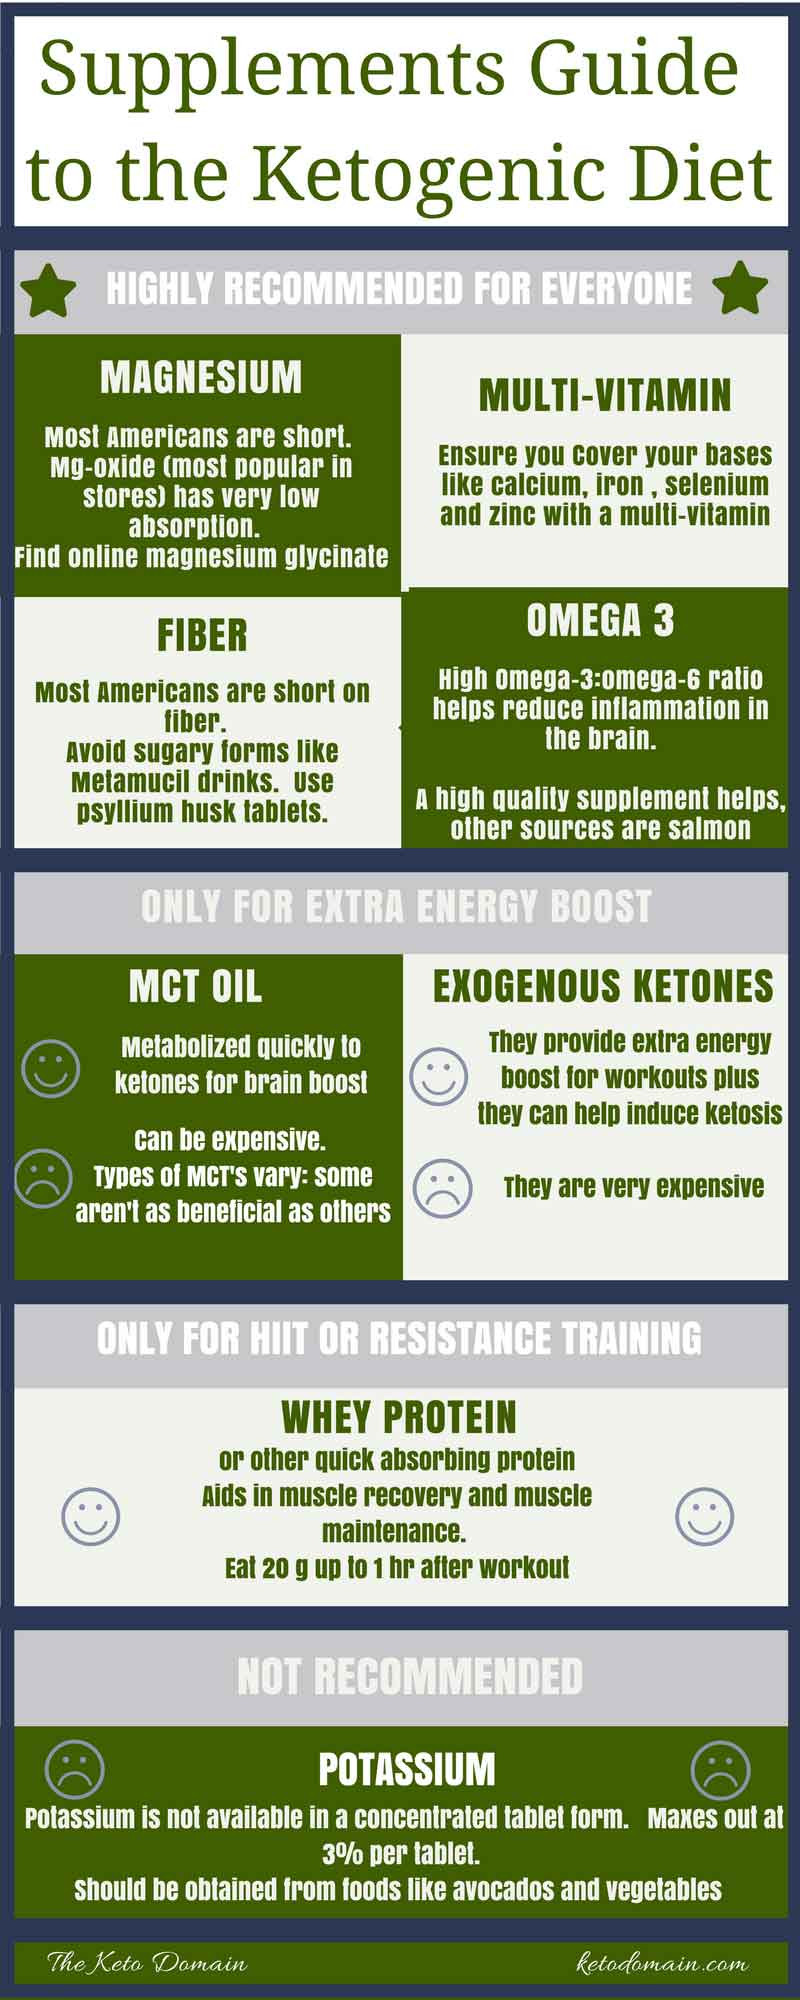 How To Keto For Beginners
 Beginners Guide Supplements for the Keto Diet